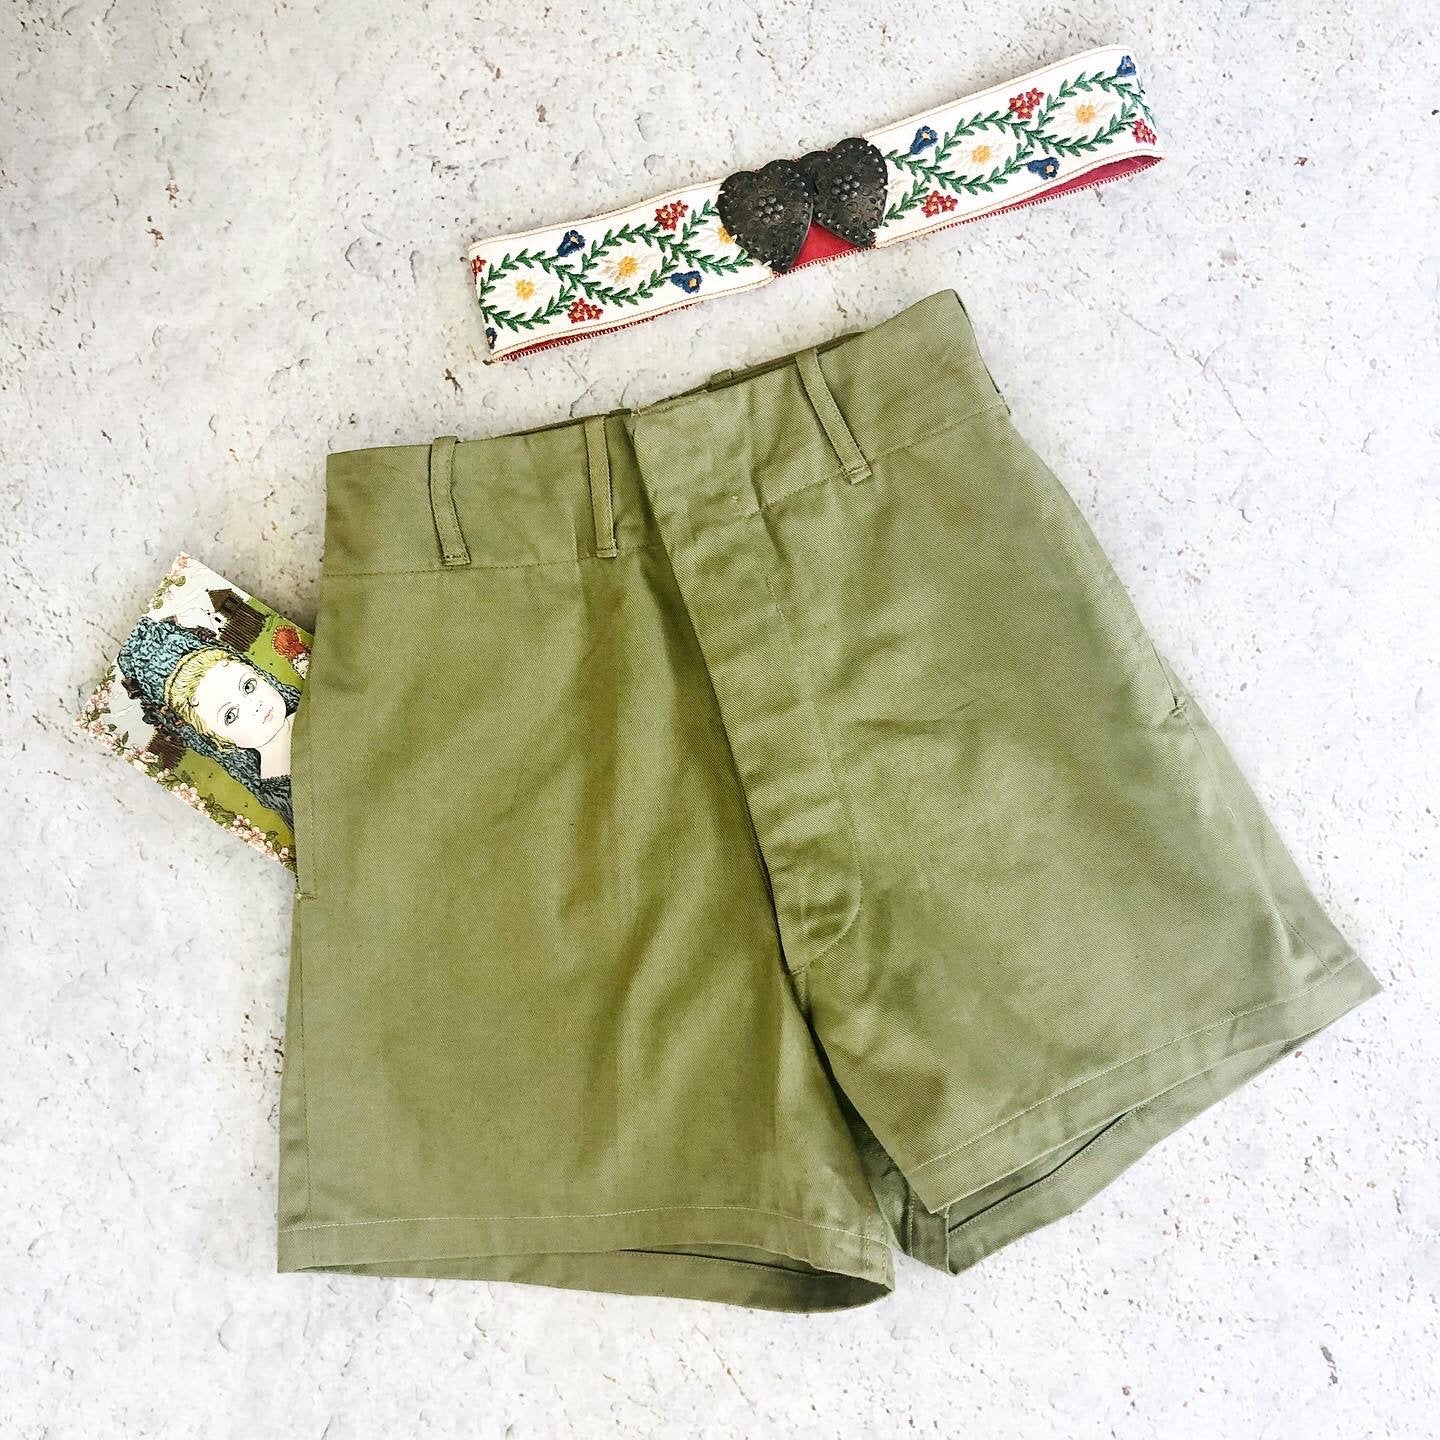 RARE WWII 1940s Canadian Army Olive Khaki Cotton Military Shorts w High Waist + Pockets! - Choose Your Size